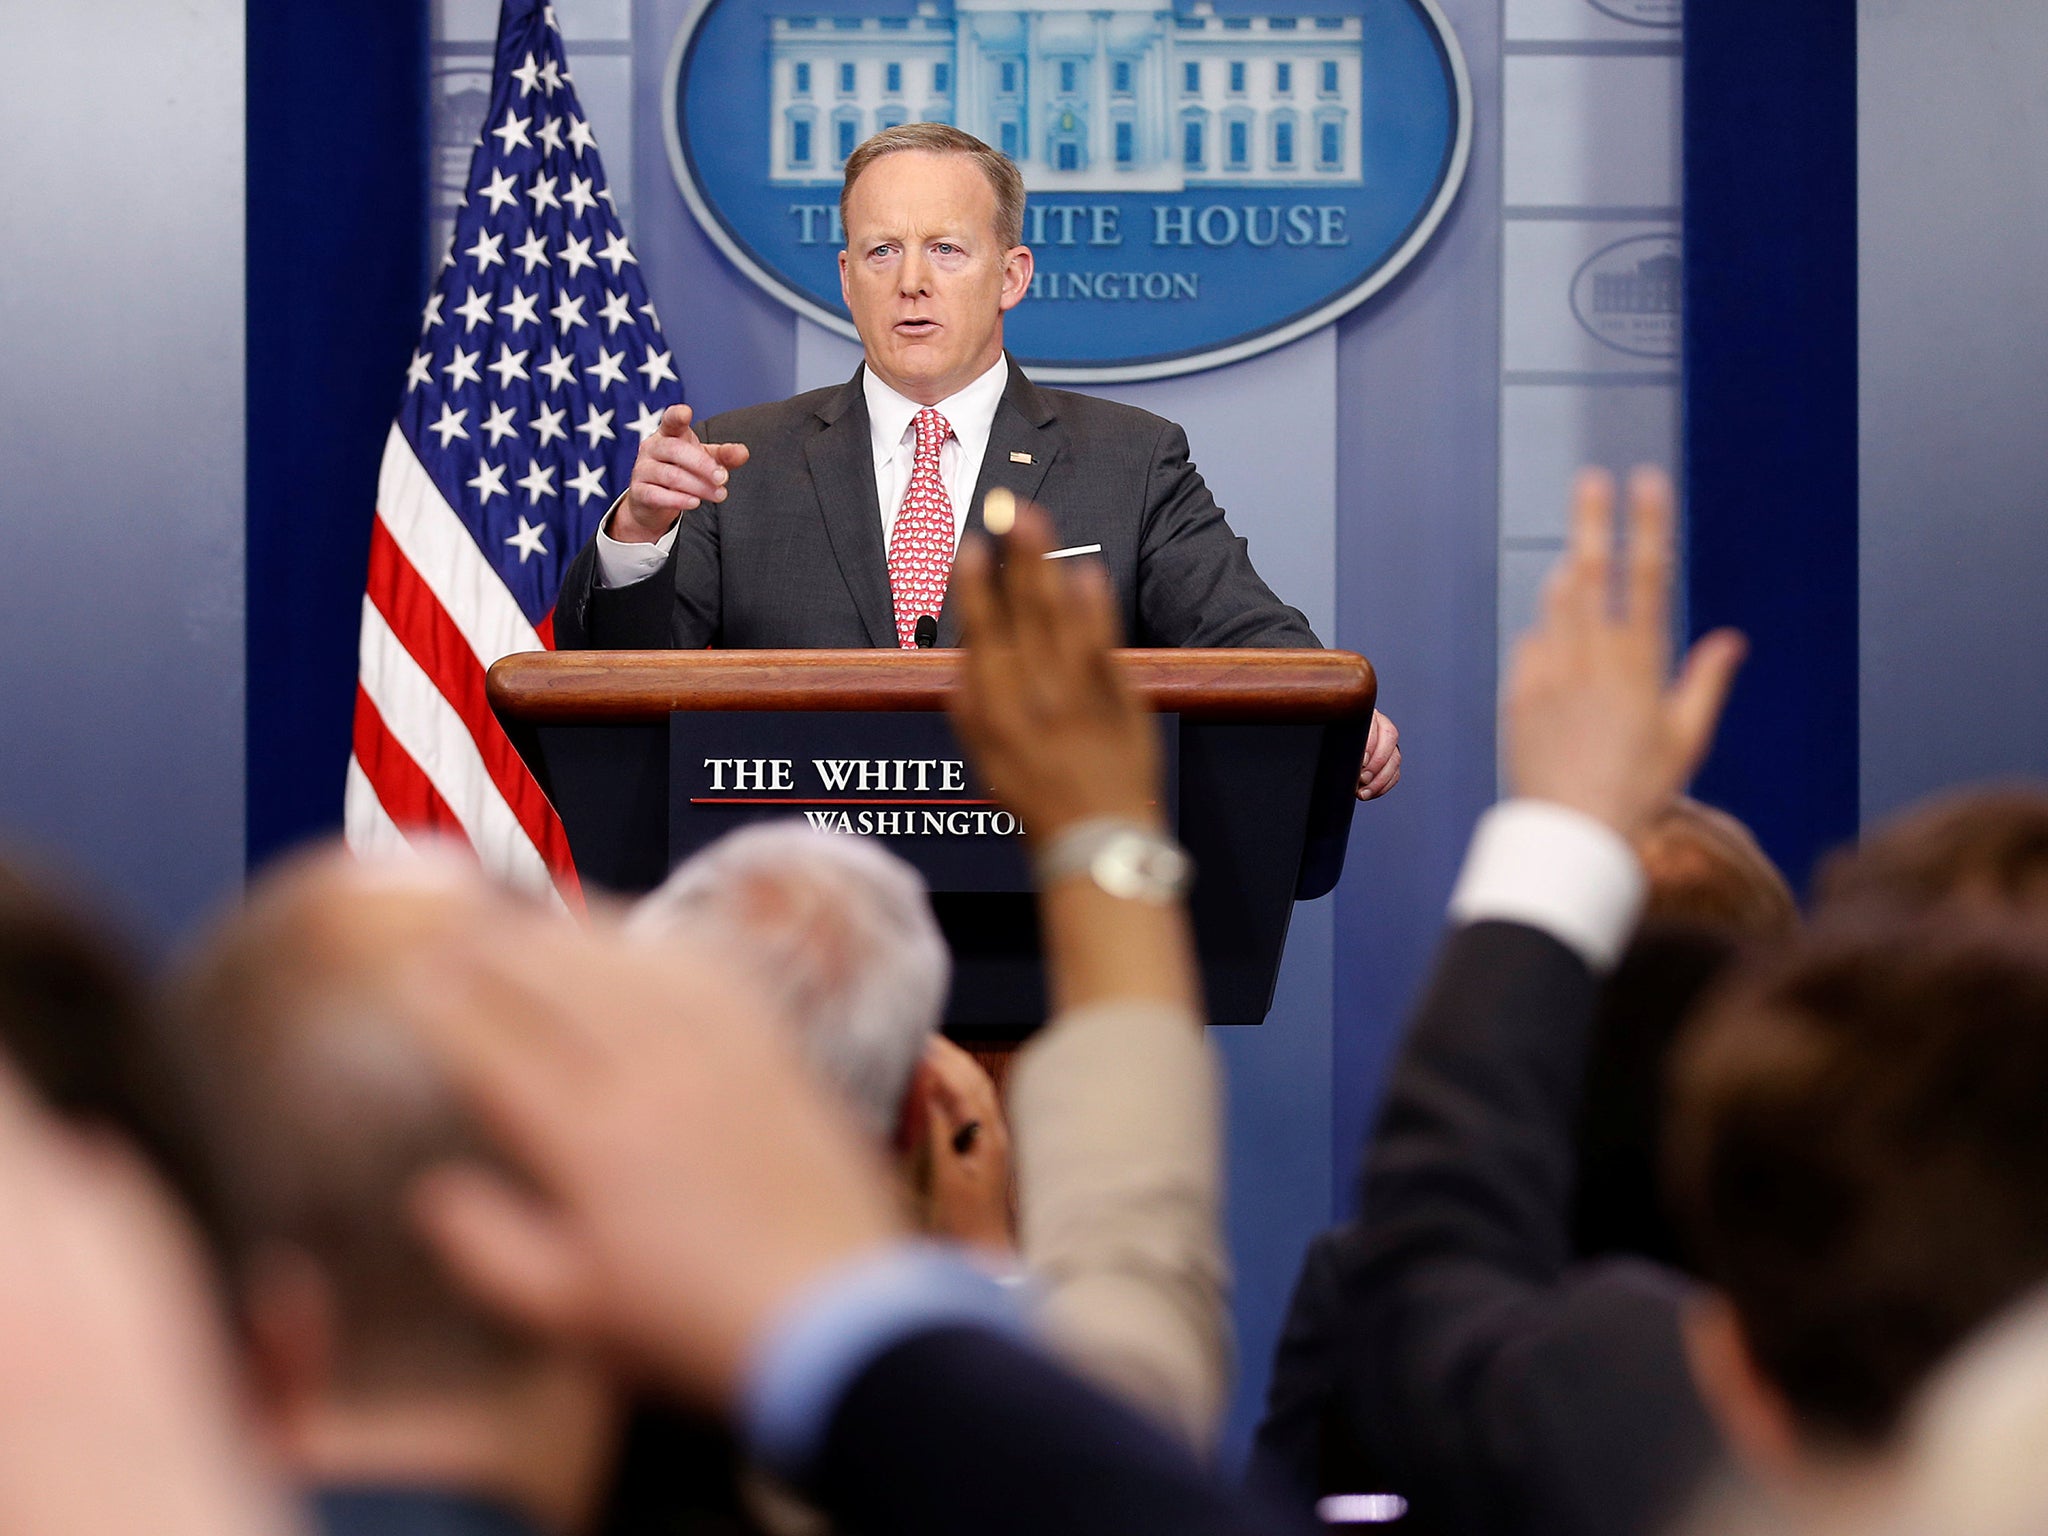 Sean Spicer faced questioning over whether the President will ever release his tax returns